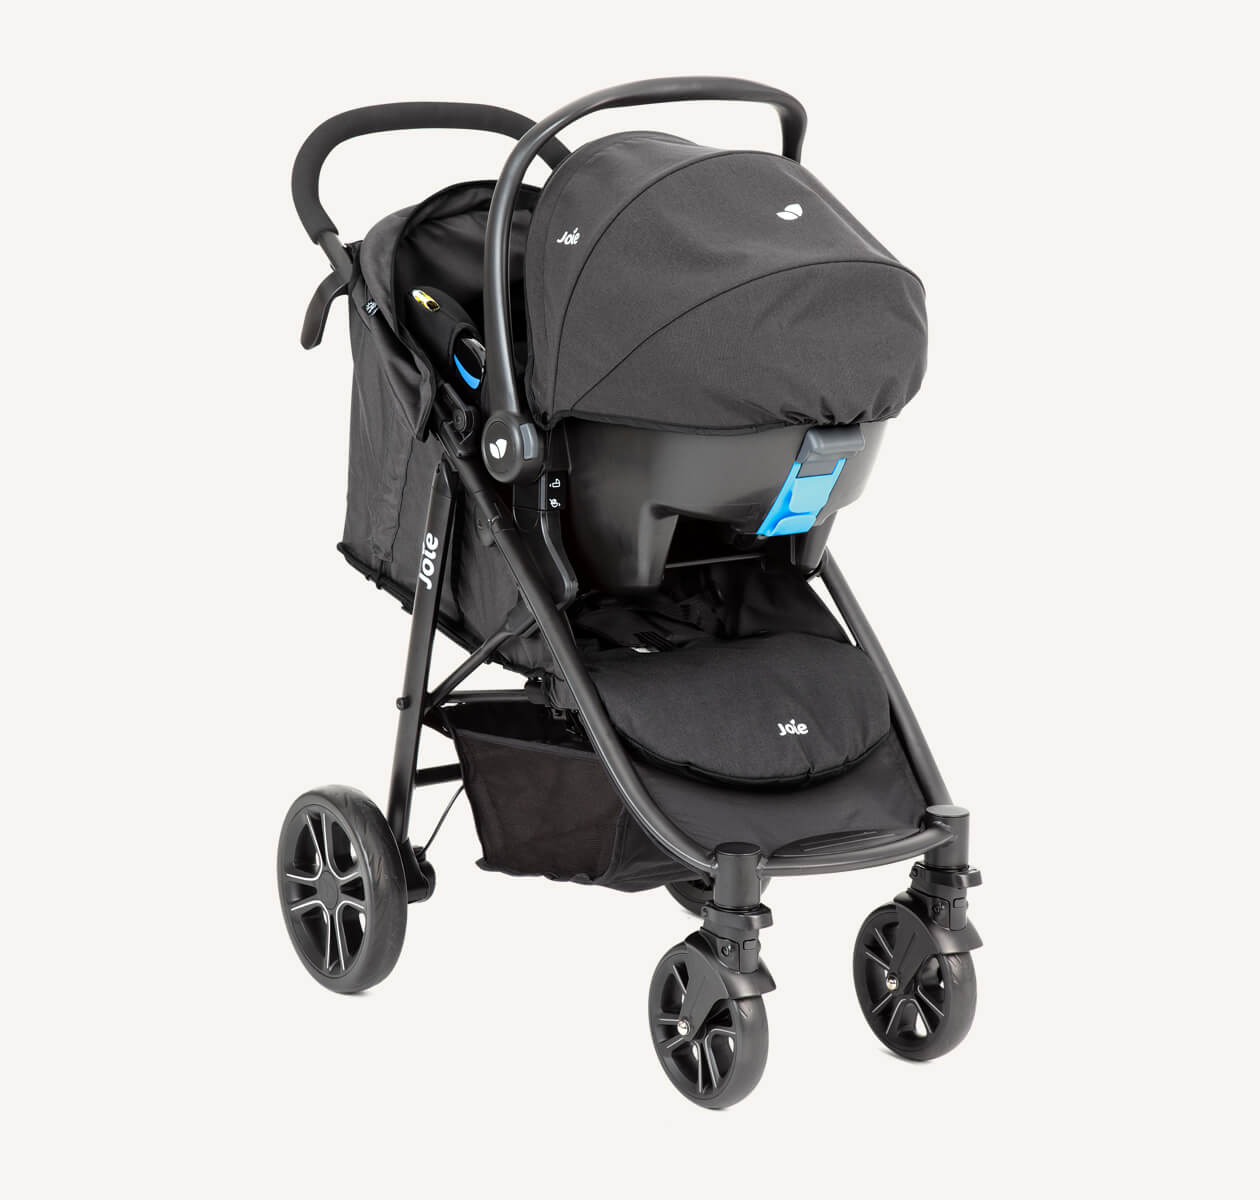 Black Joie Litetrax E travel system with the infant car seat attached to the stroller, facing toward the right at an angle.